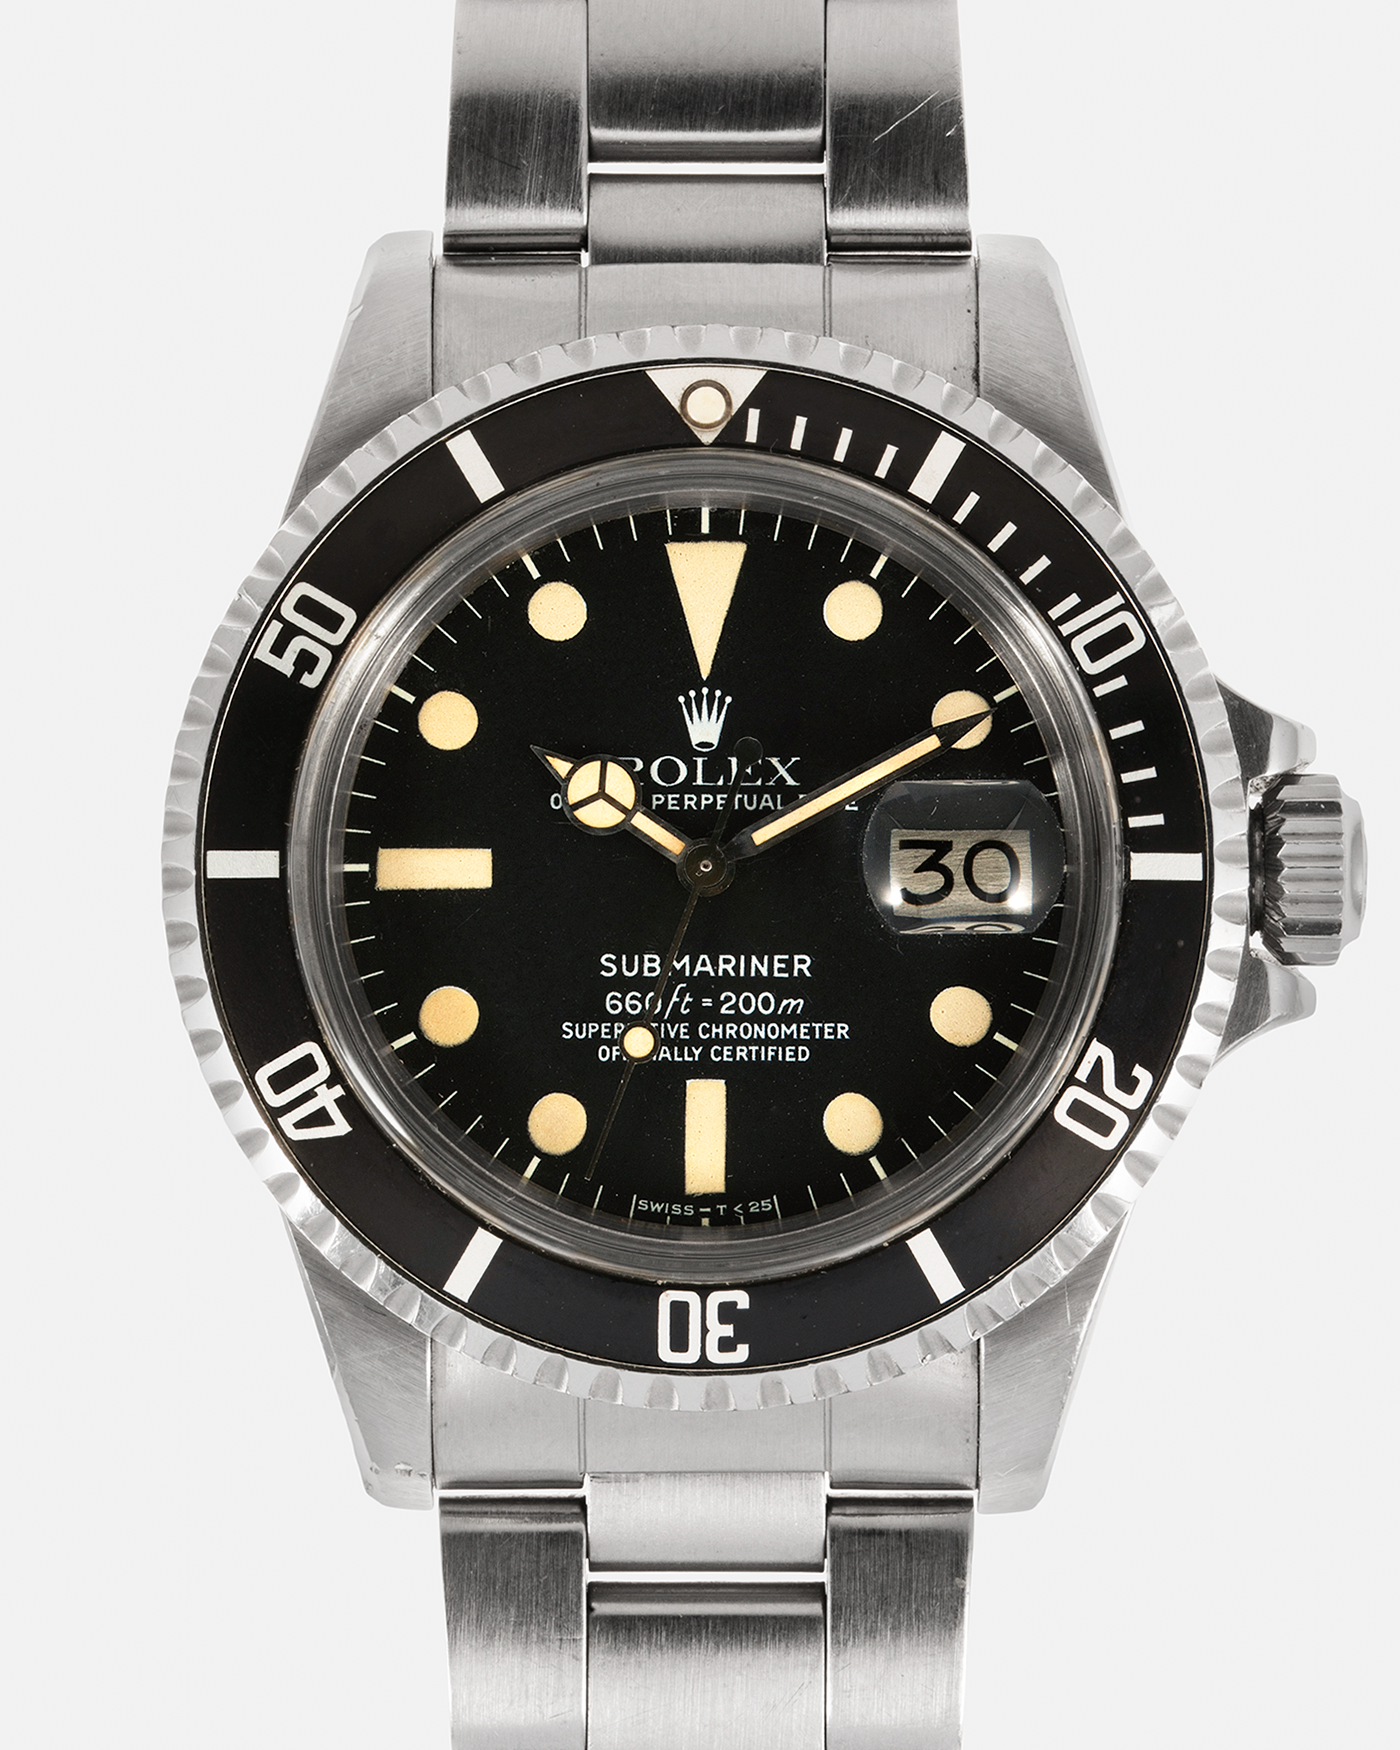 Brand: Rolex Year: 1978 Model: ‘White’ Submariner Reference Number: 1680 Serial Number: 529XXXX Material: Stainless Steel Movement: Rolex Cal. 1575, Self-Winding Case Diameter: 39mm Lug Width: 20mm Bracelet: Rolex Stainless Steel ‘93150’ Oyster bracelet with Signed ‘VB’ Clasp and ‘580’ Curved End Links